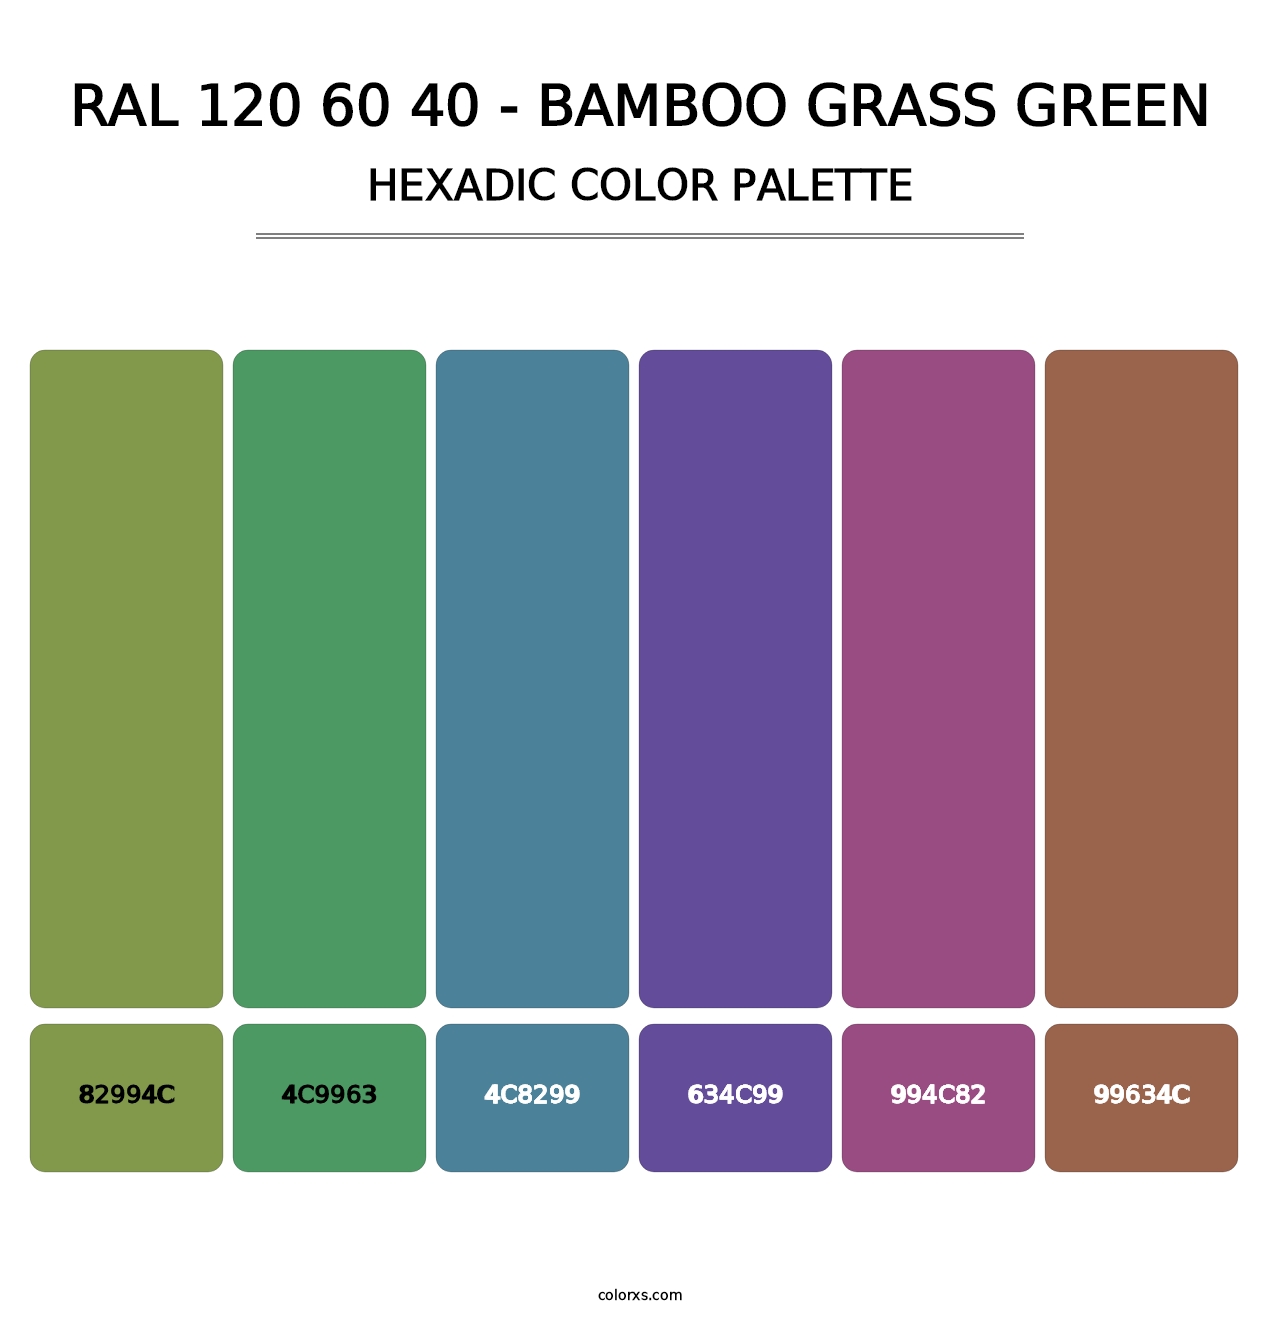 RAL 120 60 40 - Bamboo Grass Green - Hexadic Color Palette